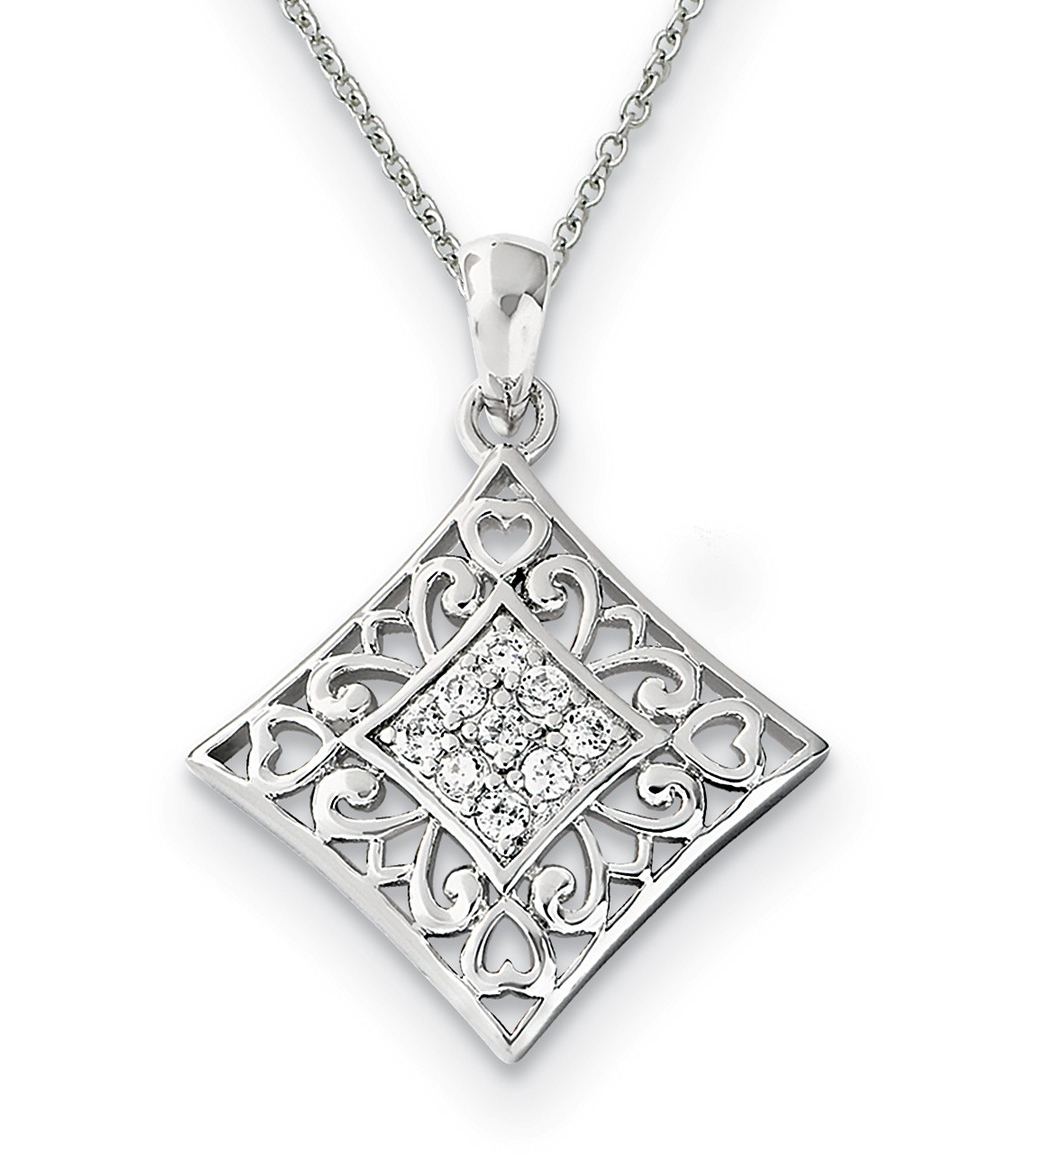   'I Love You All Year Long' CZ Pendant Necklace, Rhodium-Plated Sterling Silver, 18